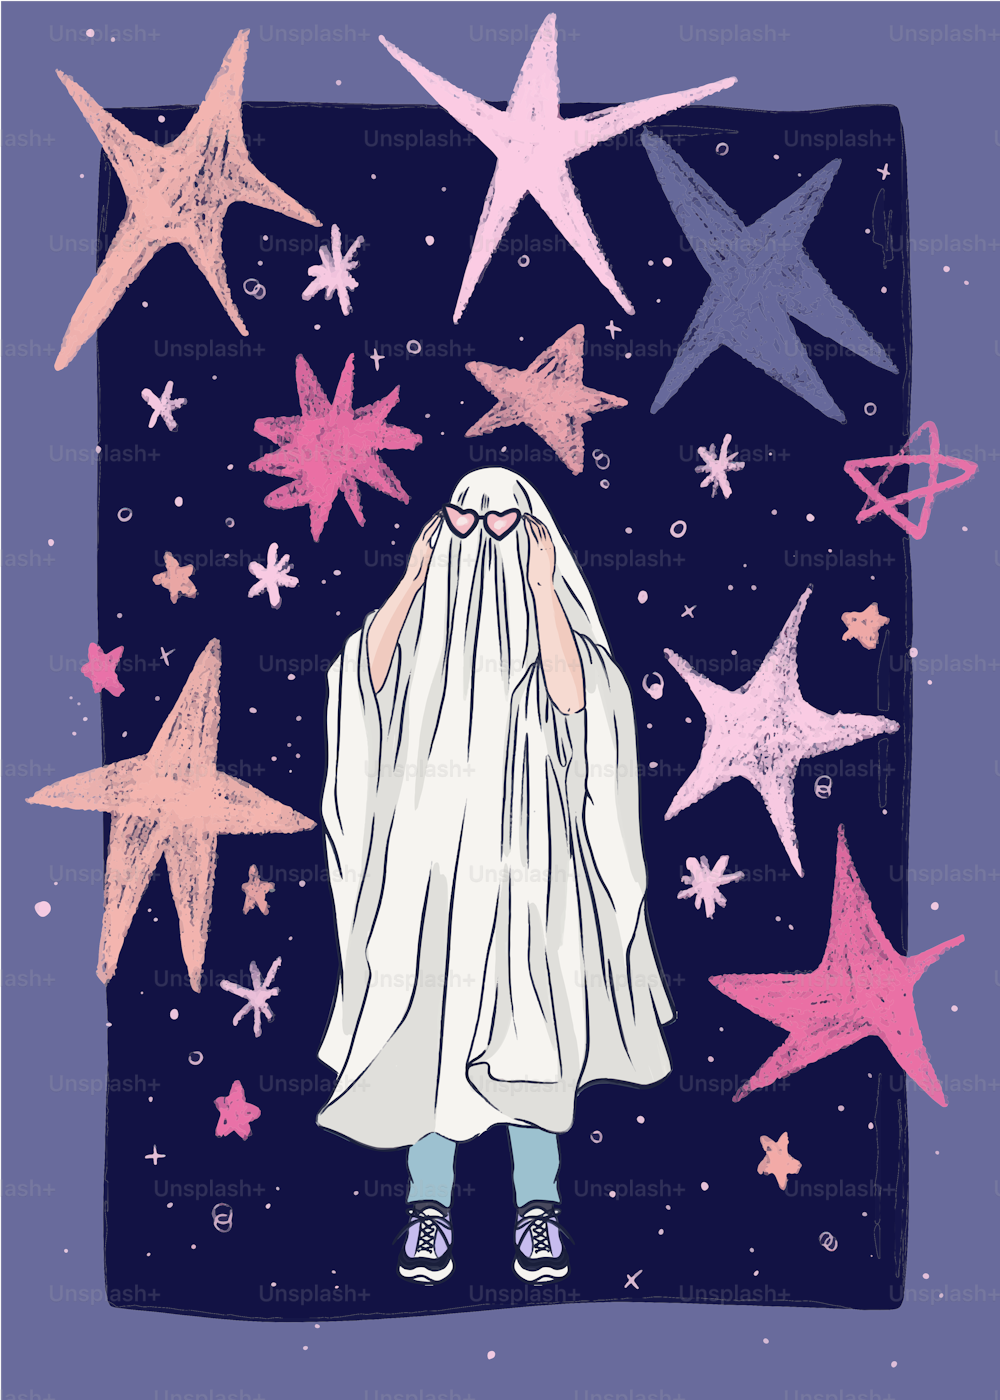 a drawing of a person in a white cloak surrounded by stars